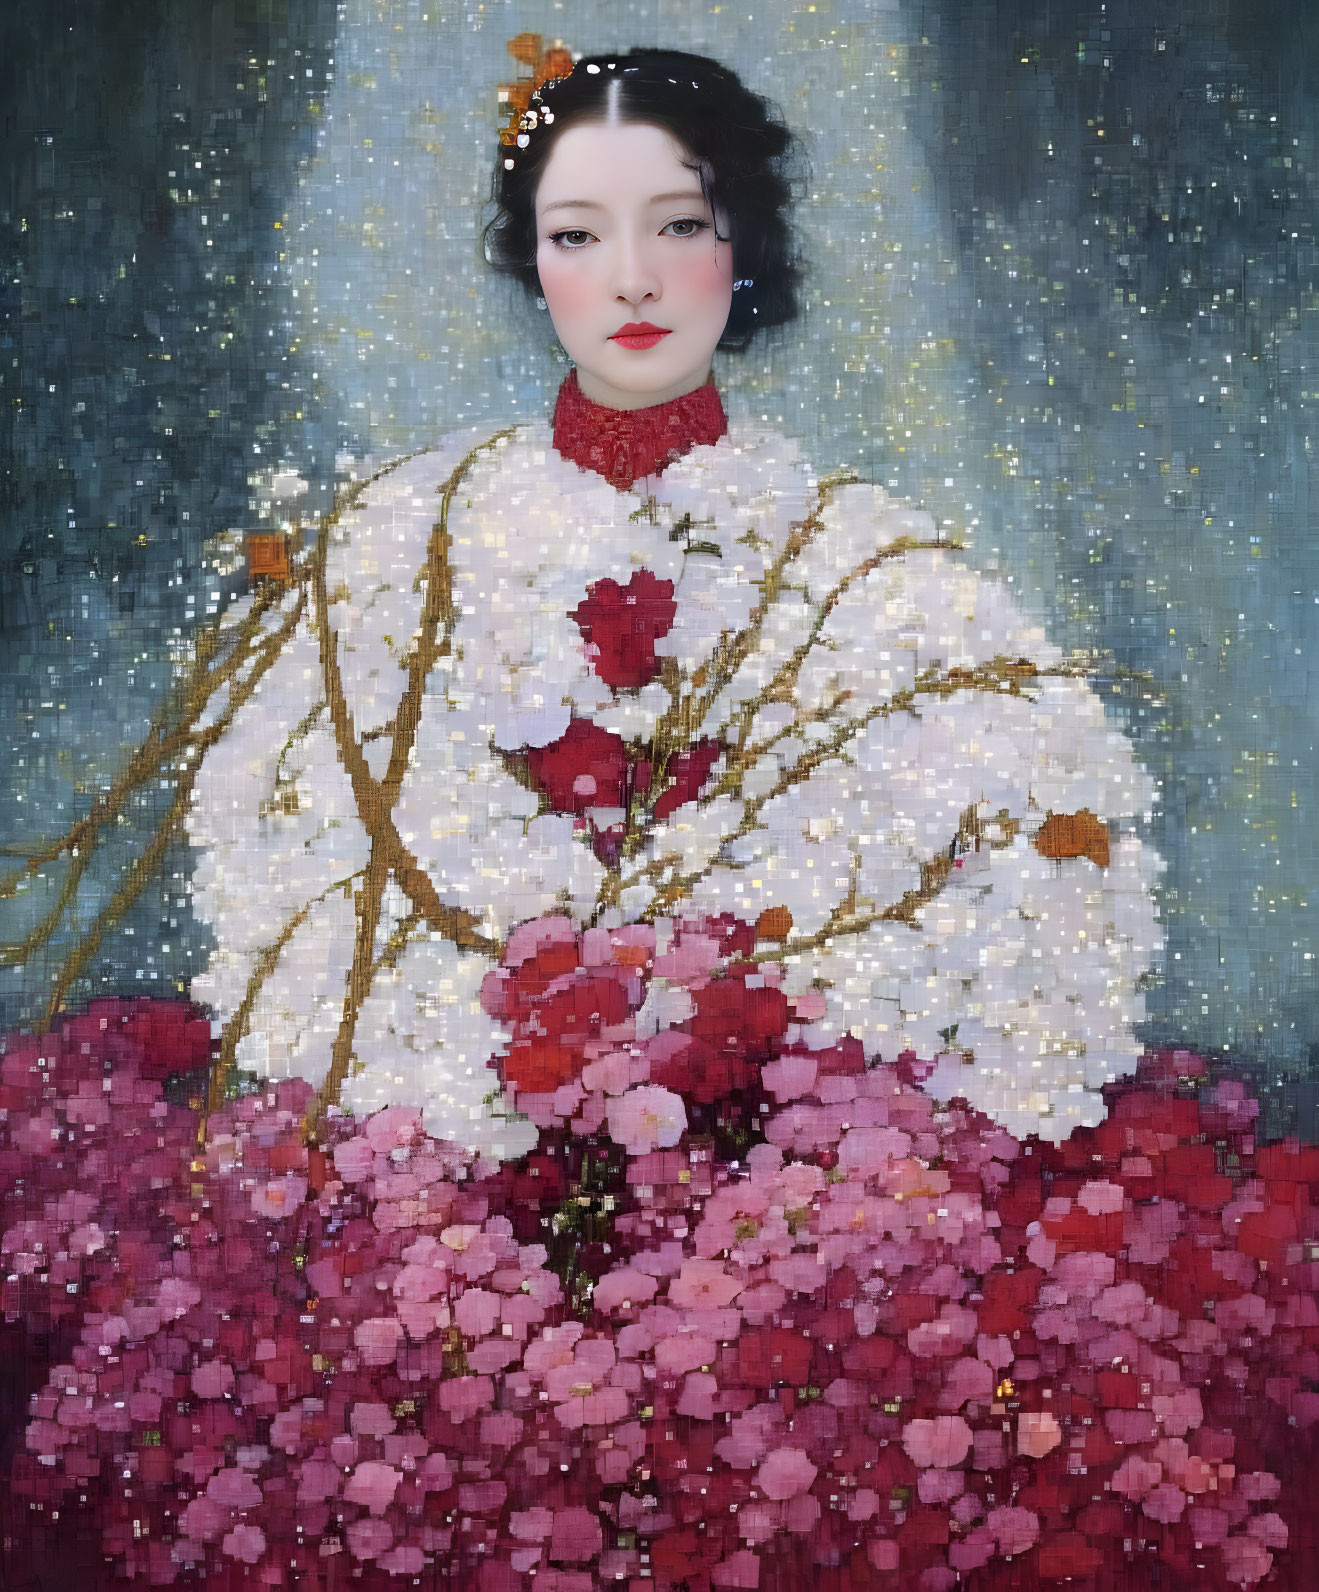 Portrait of Woman with Pale Skin and Dark Hair Surrounded by Flowers and Stars